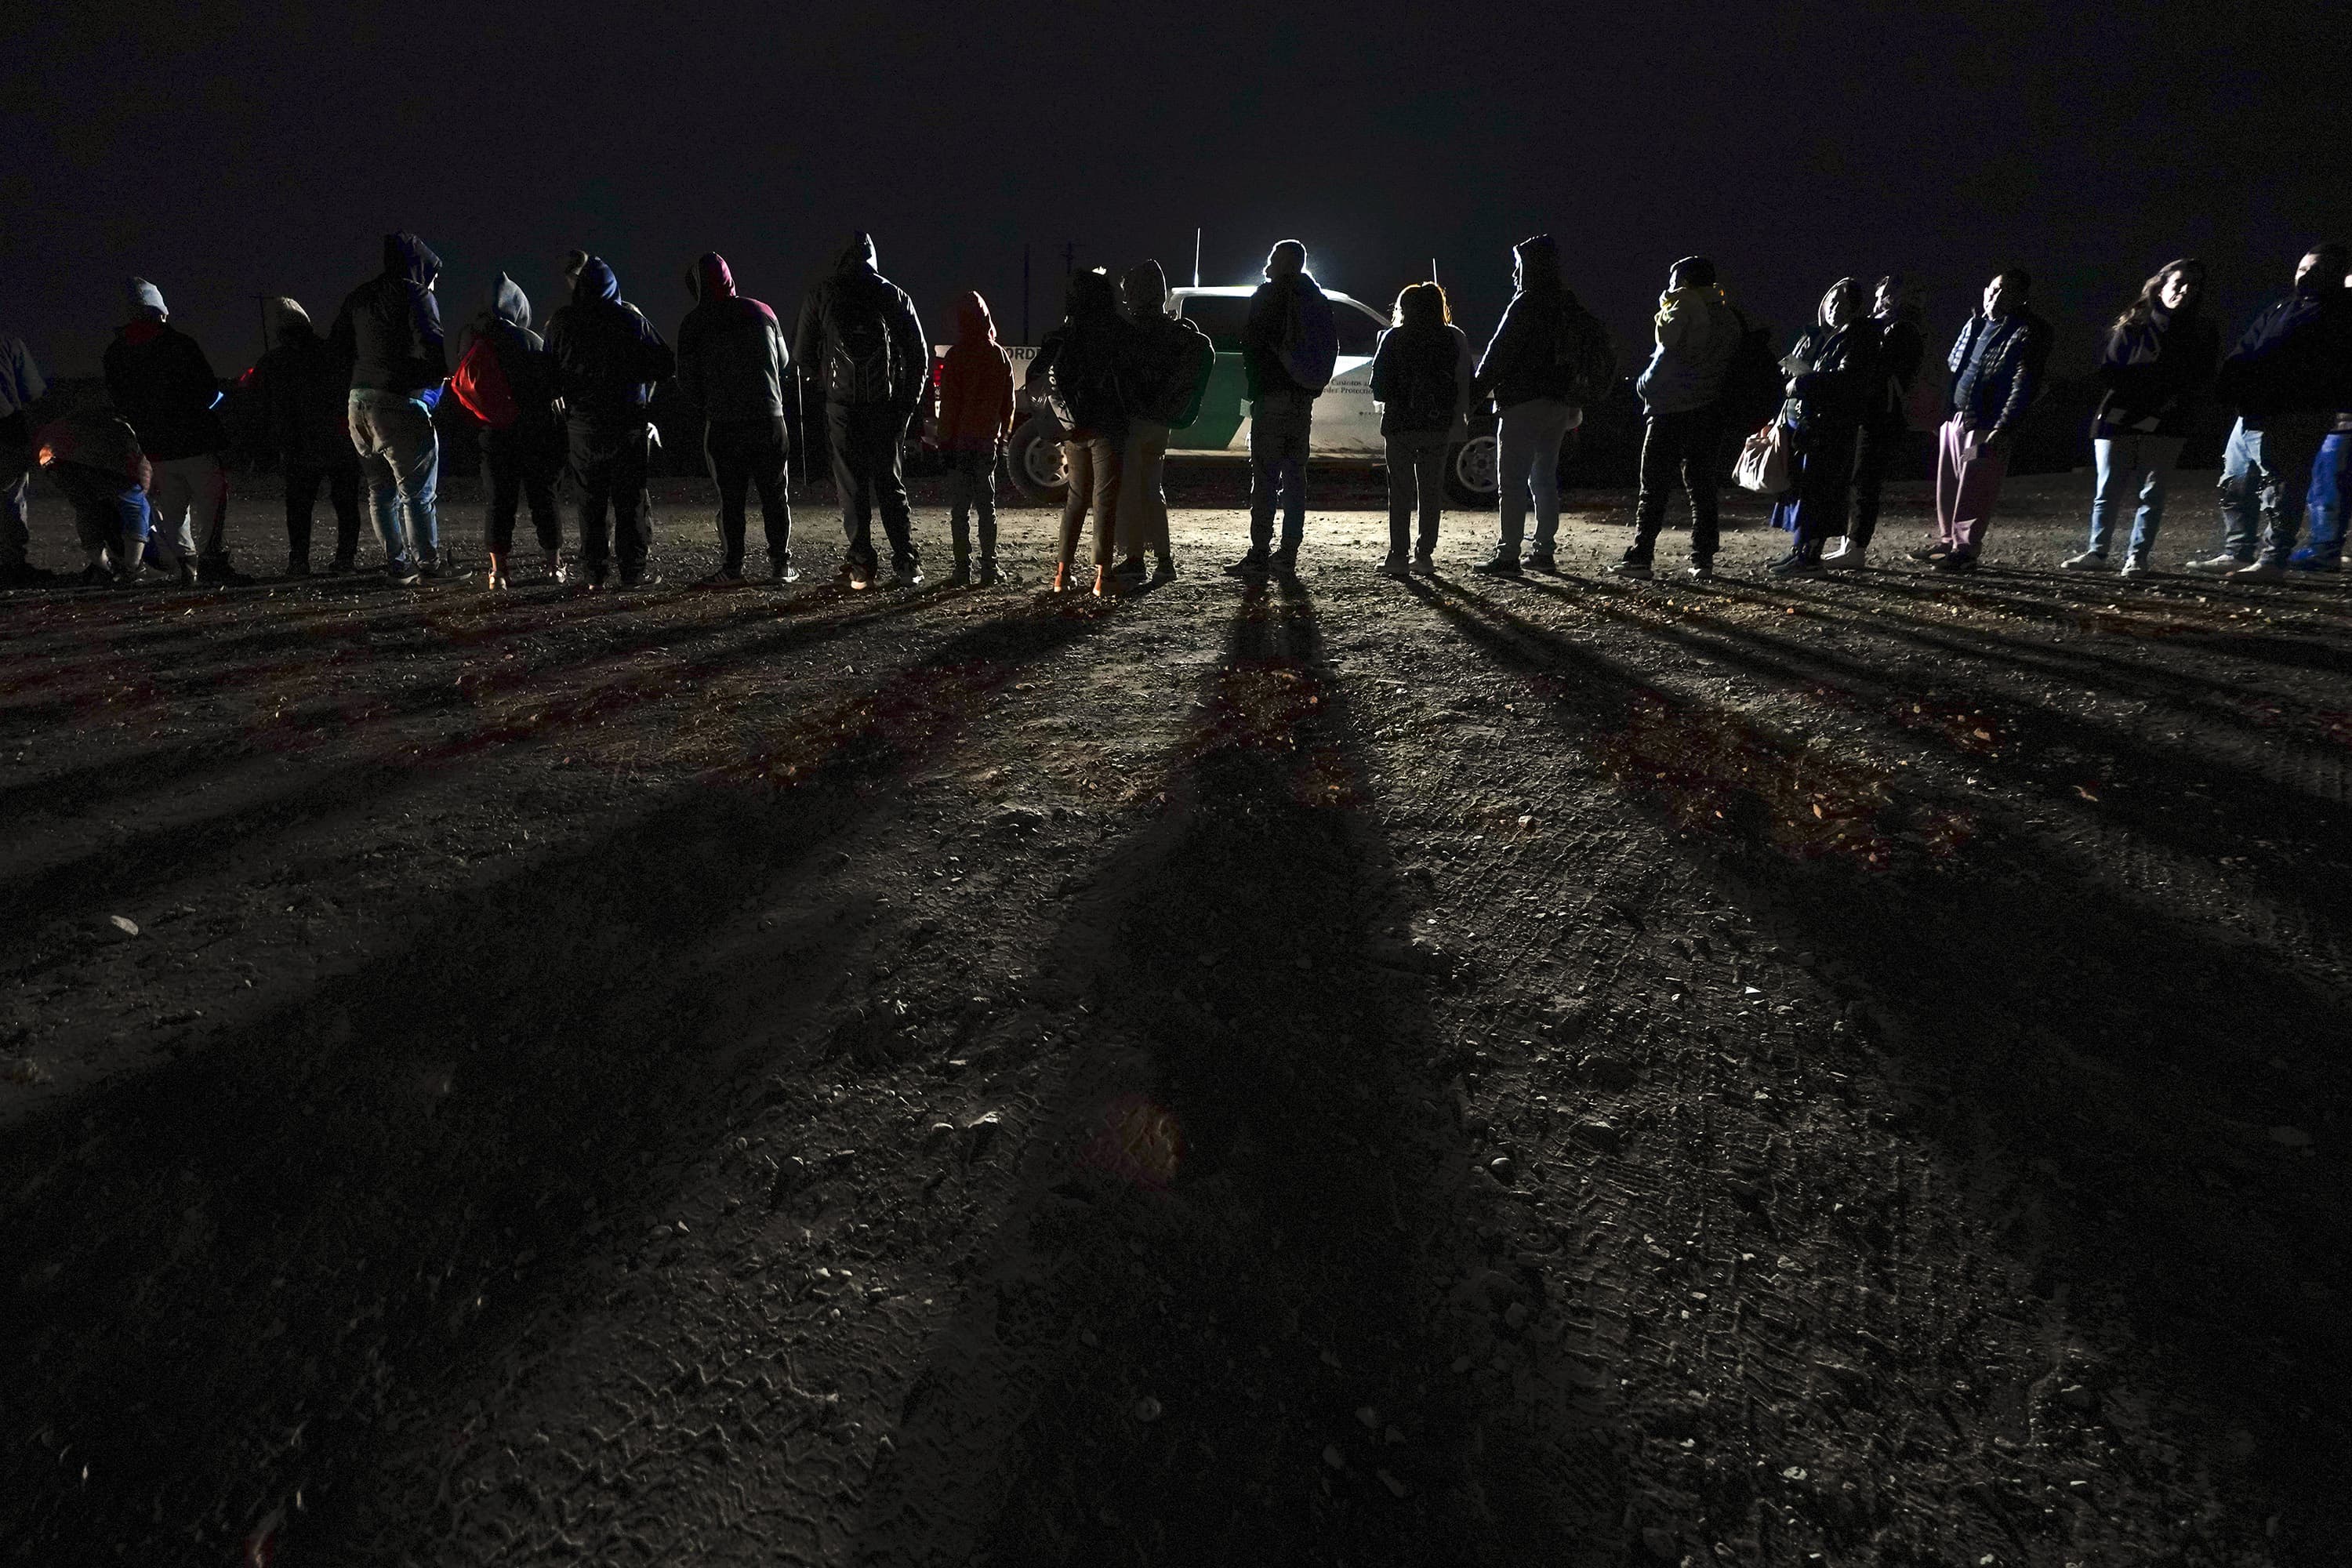 Migrants wait to be processed to seek asylum after crossing the border into the United States on Jan. 6 near Yuma, Ariz. (Gregory Bull/AP)